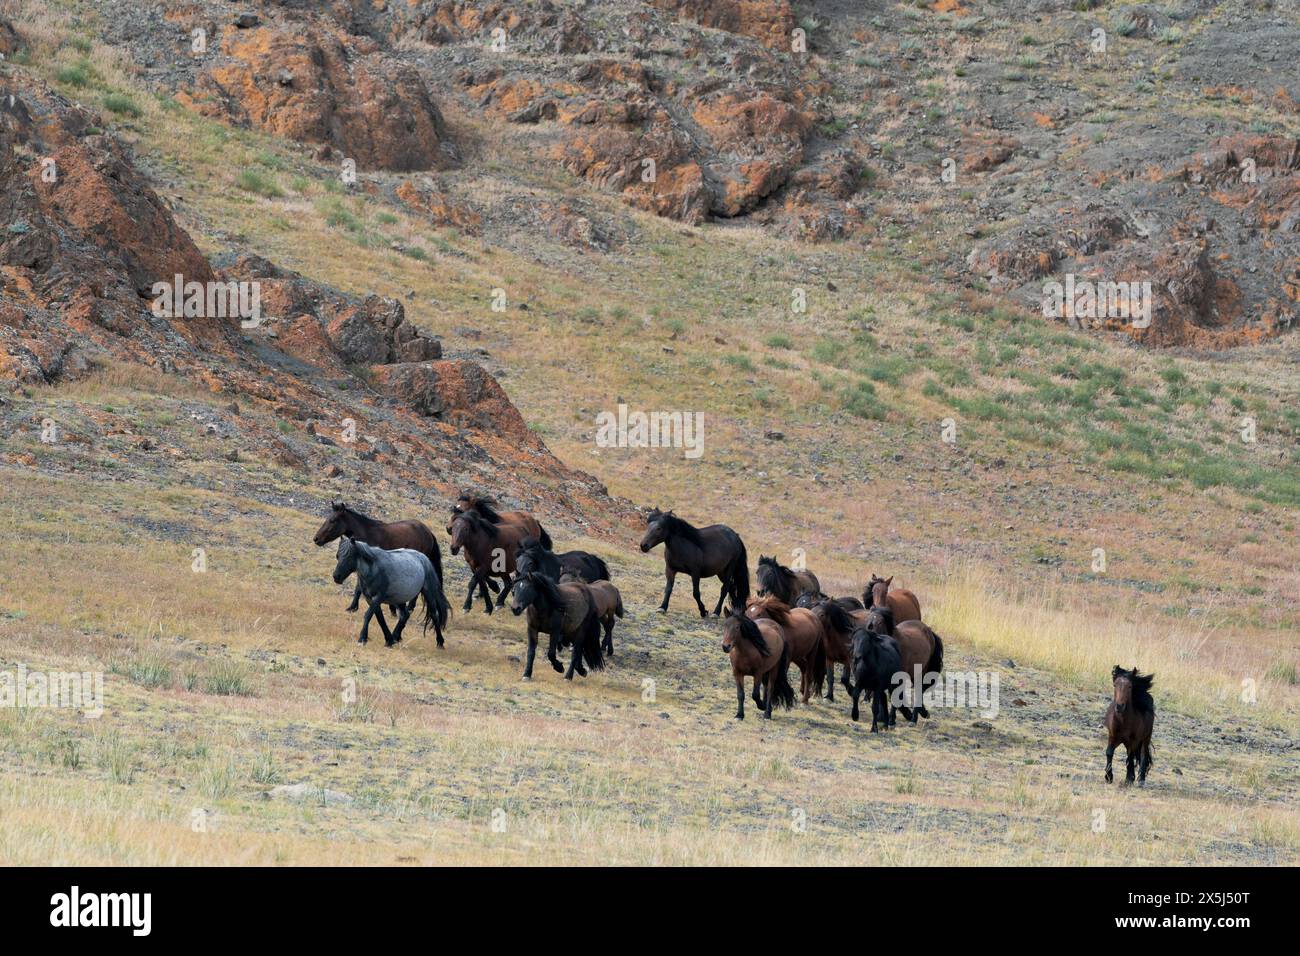 Asia, Mongolia, Bayan-Olgii Province. A herd of horses roam free on the grassland. Stock Photo